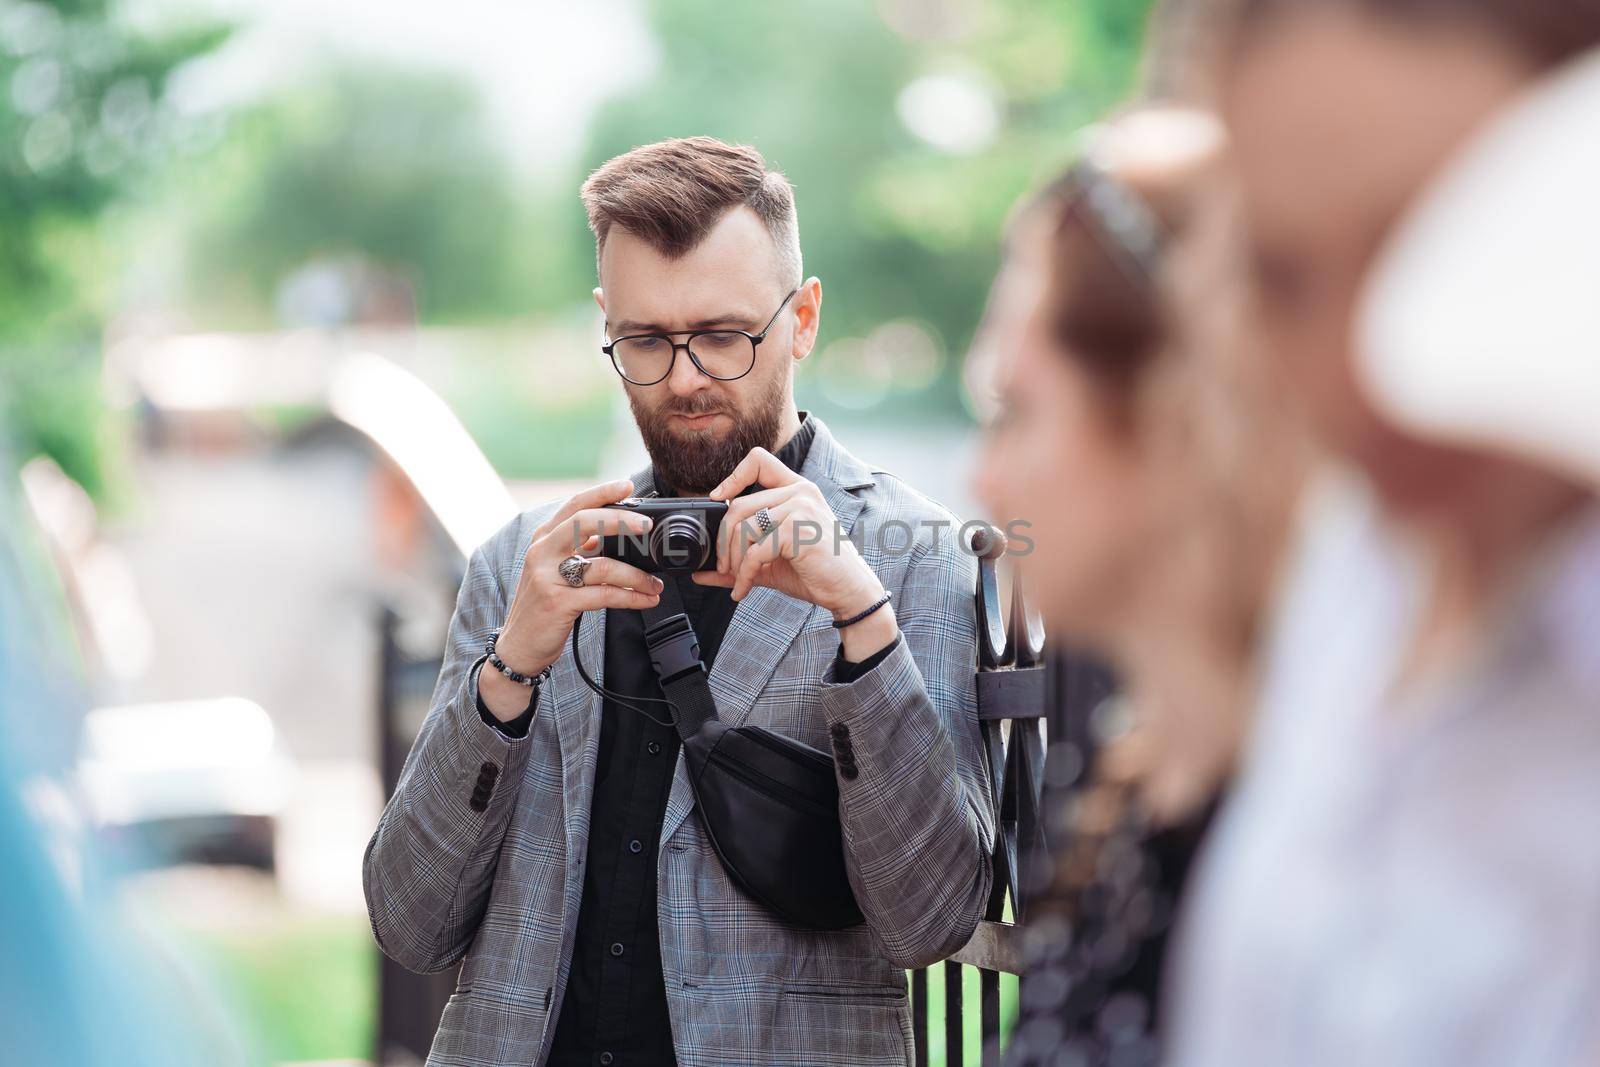 male tourist is viewing a photo on his camera. close-up.